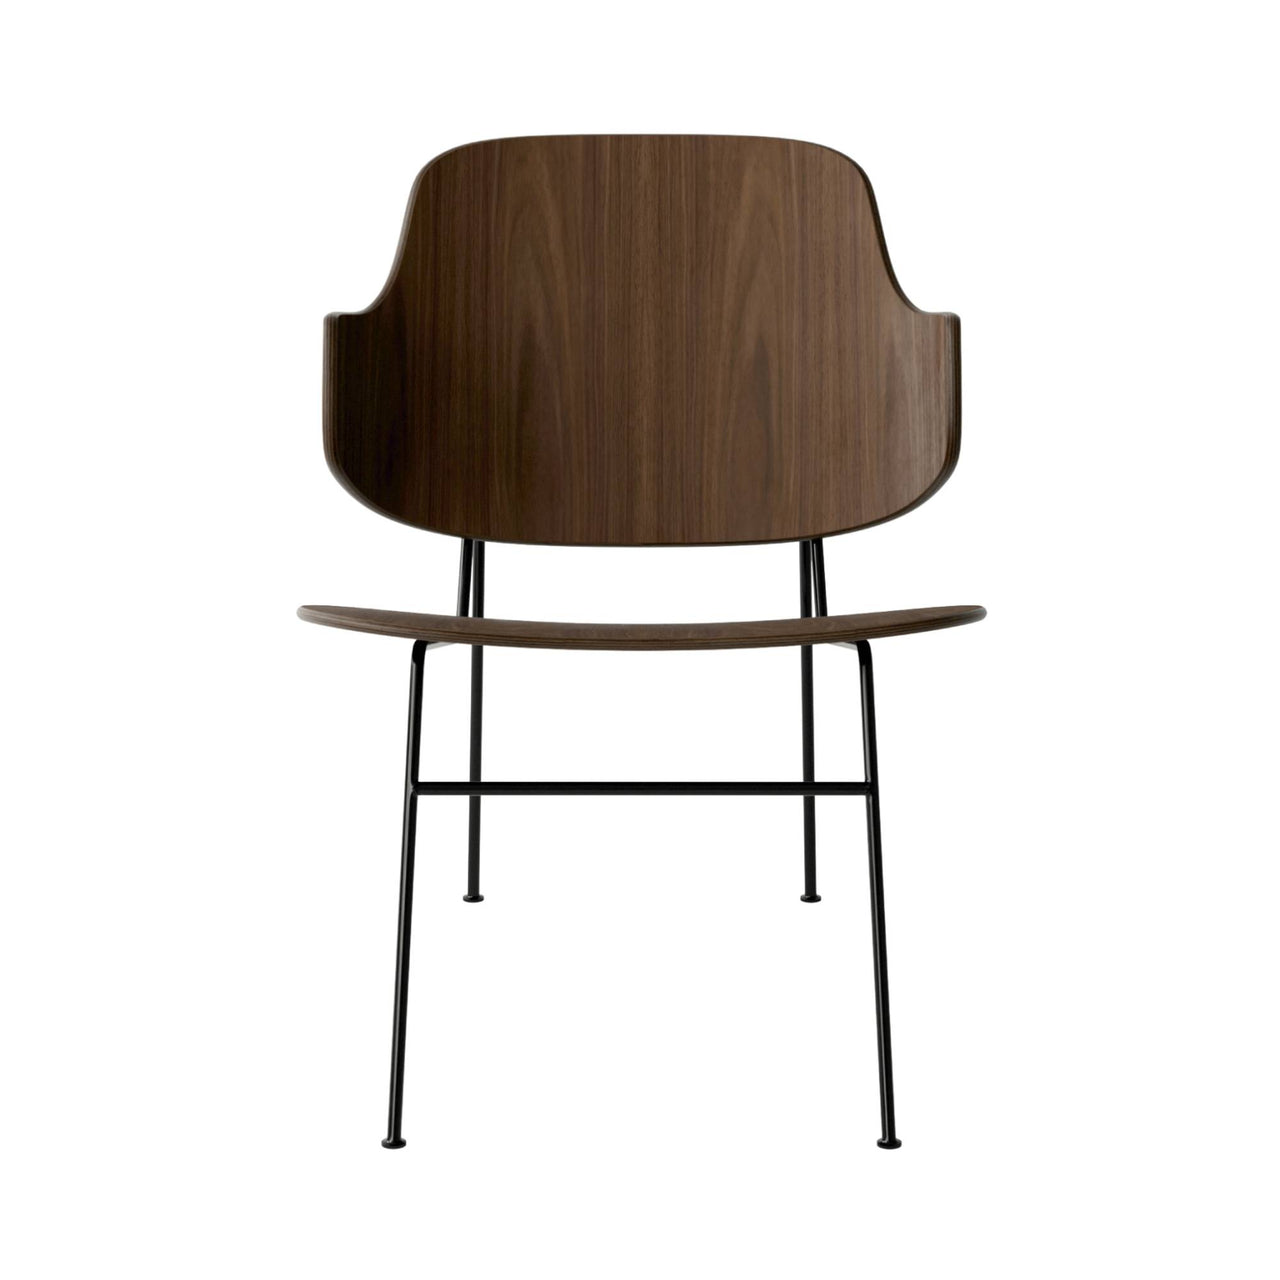 The Penguin Lounge Chair: Walnut